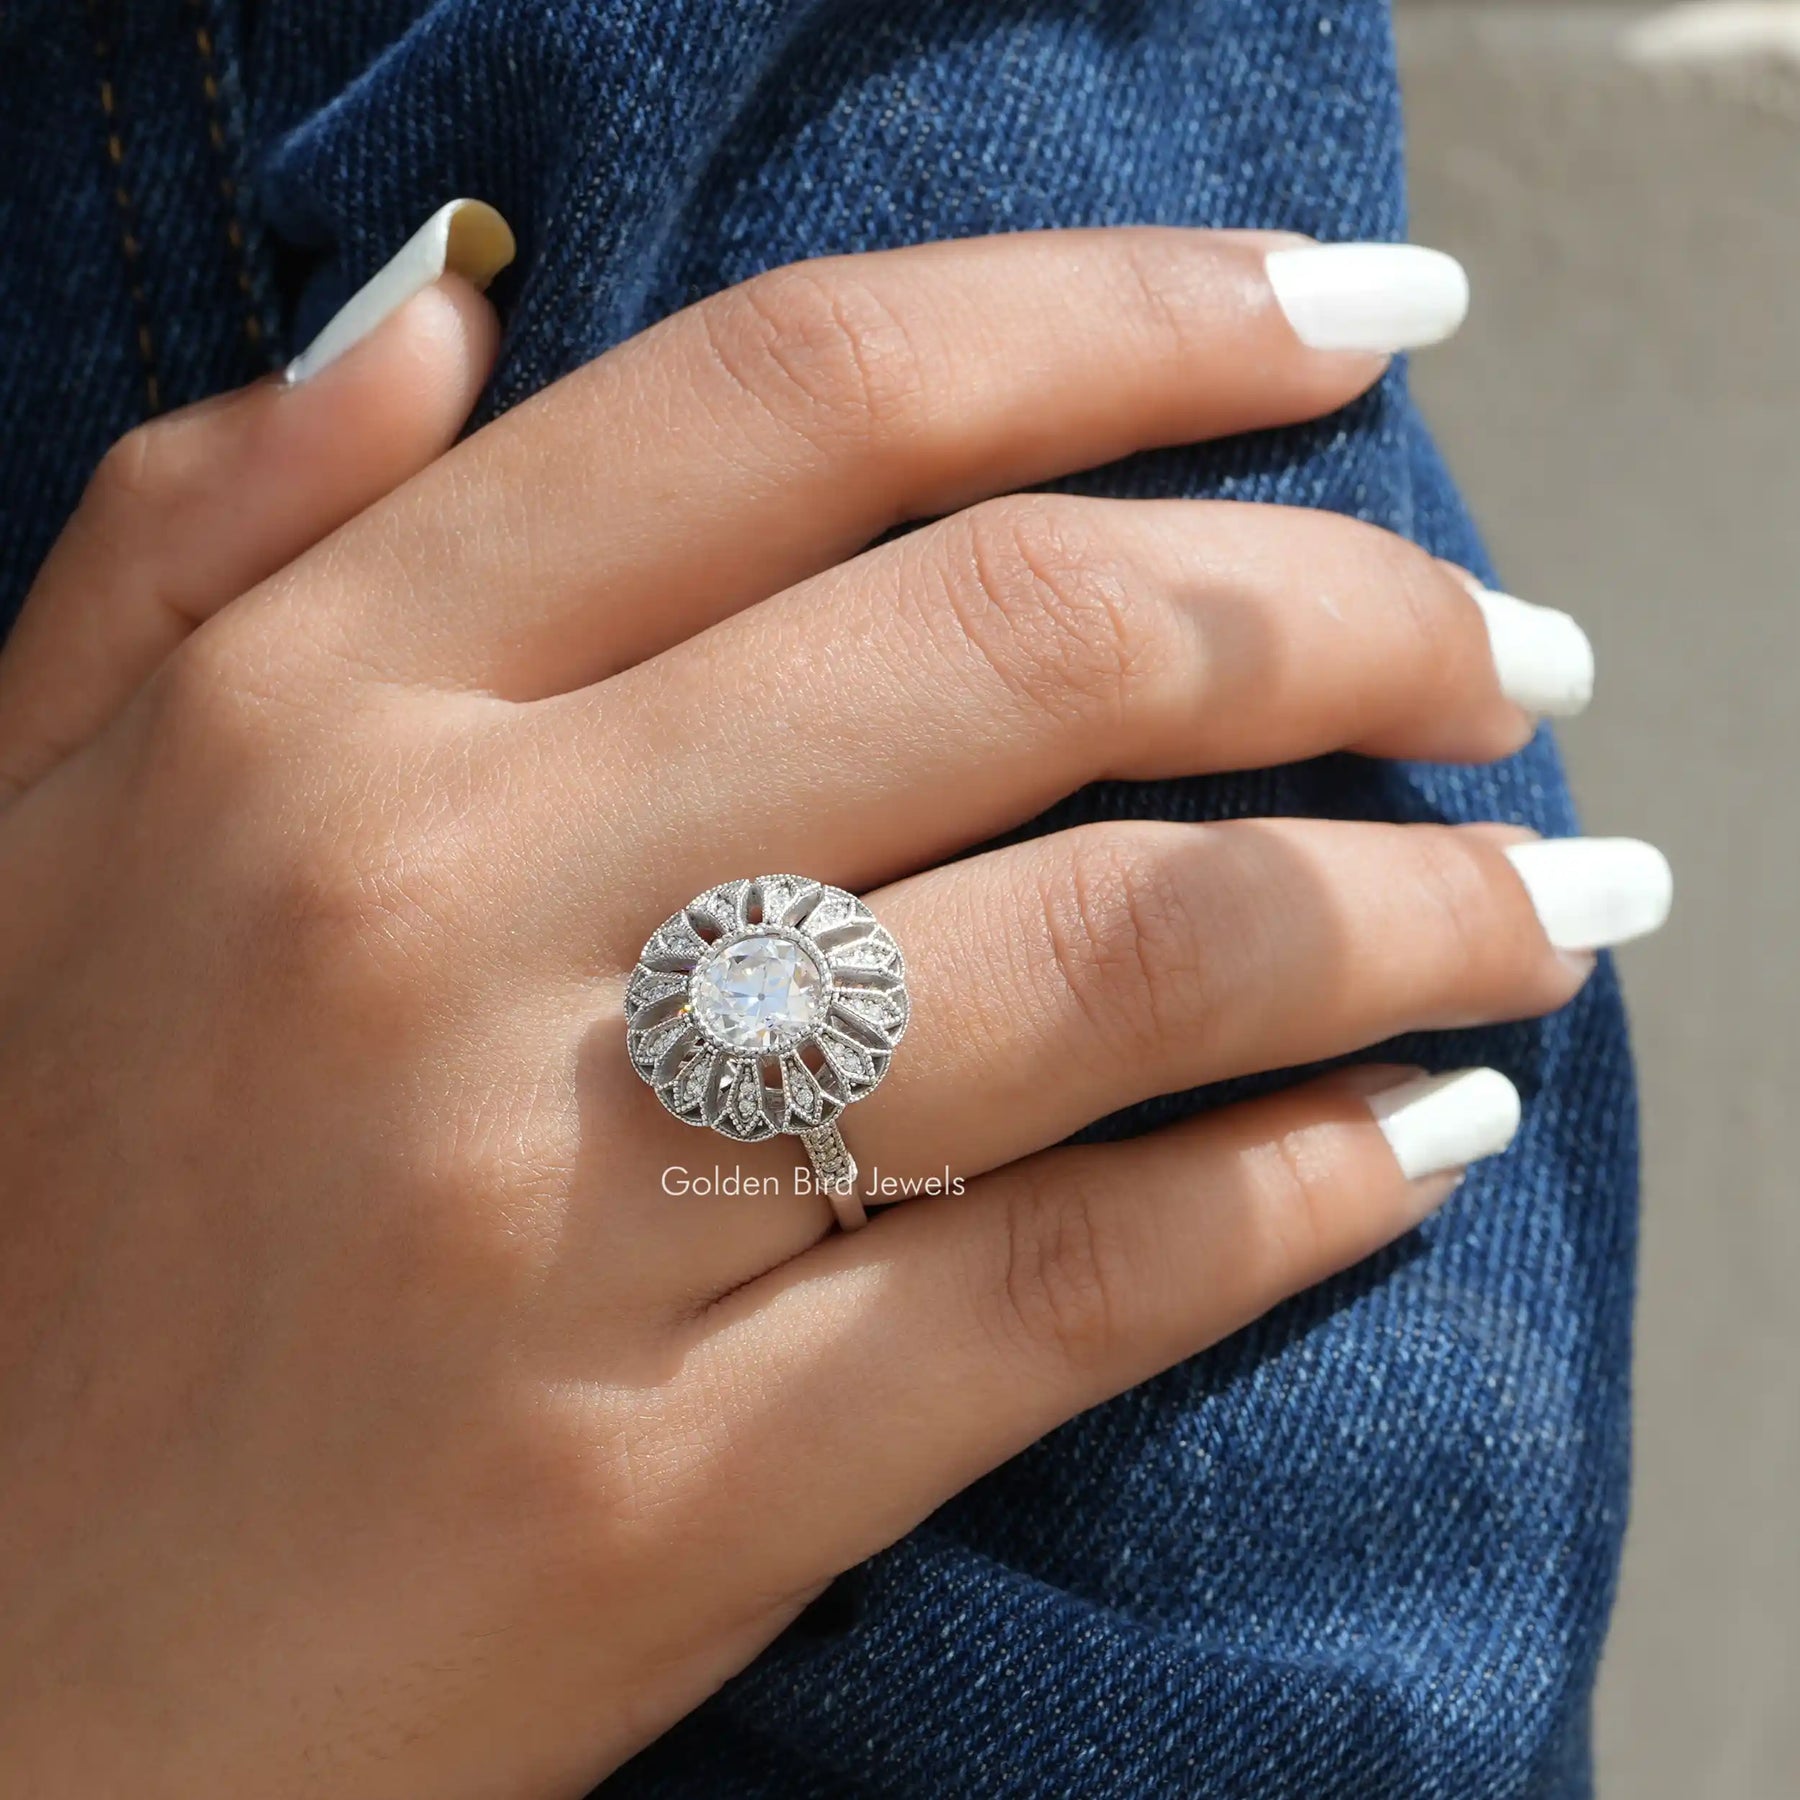 [White Gold OEC Round Cut Floral Style Vintage Ring]-[Golden Bird Jewels]